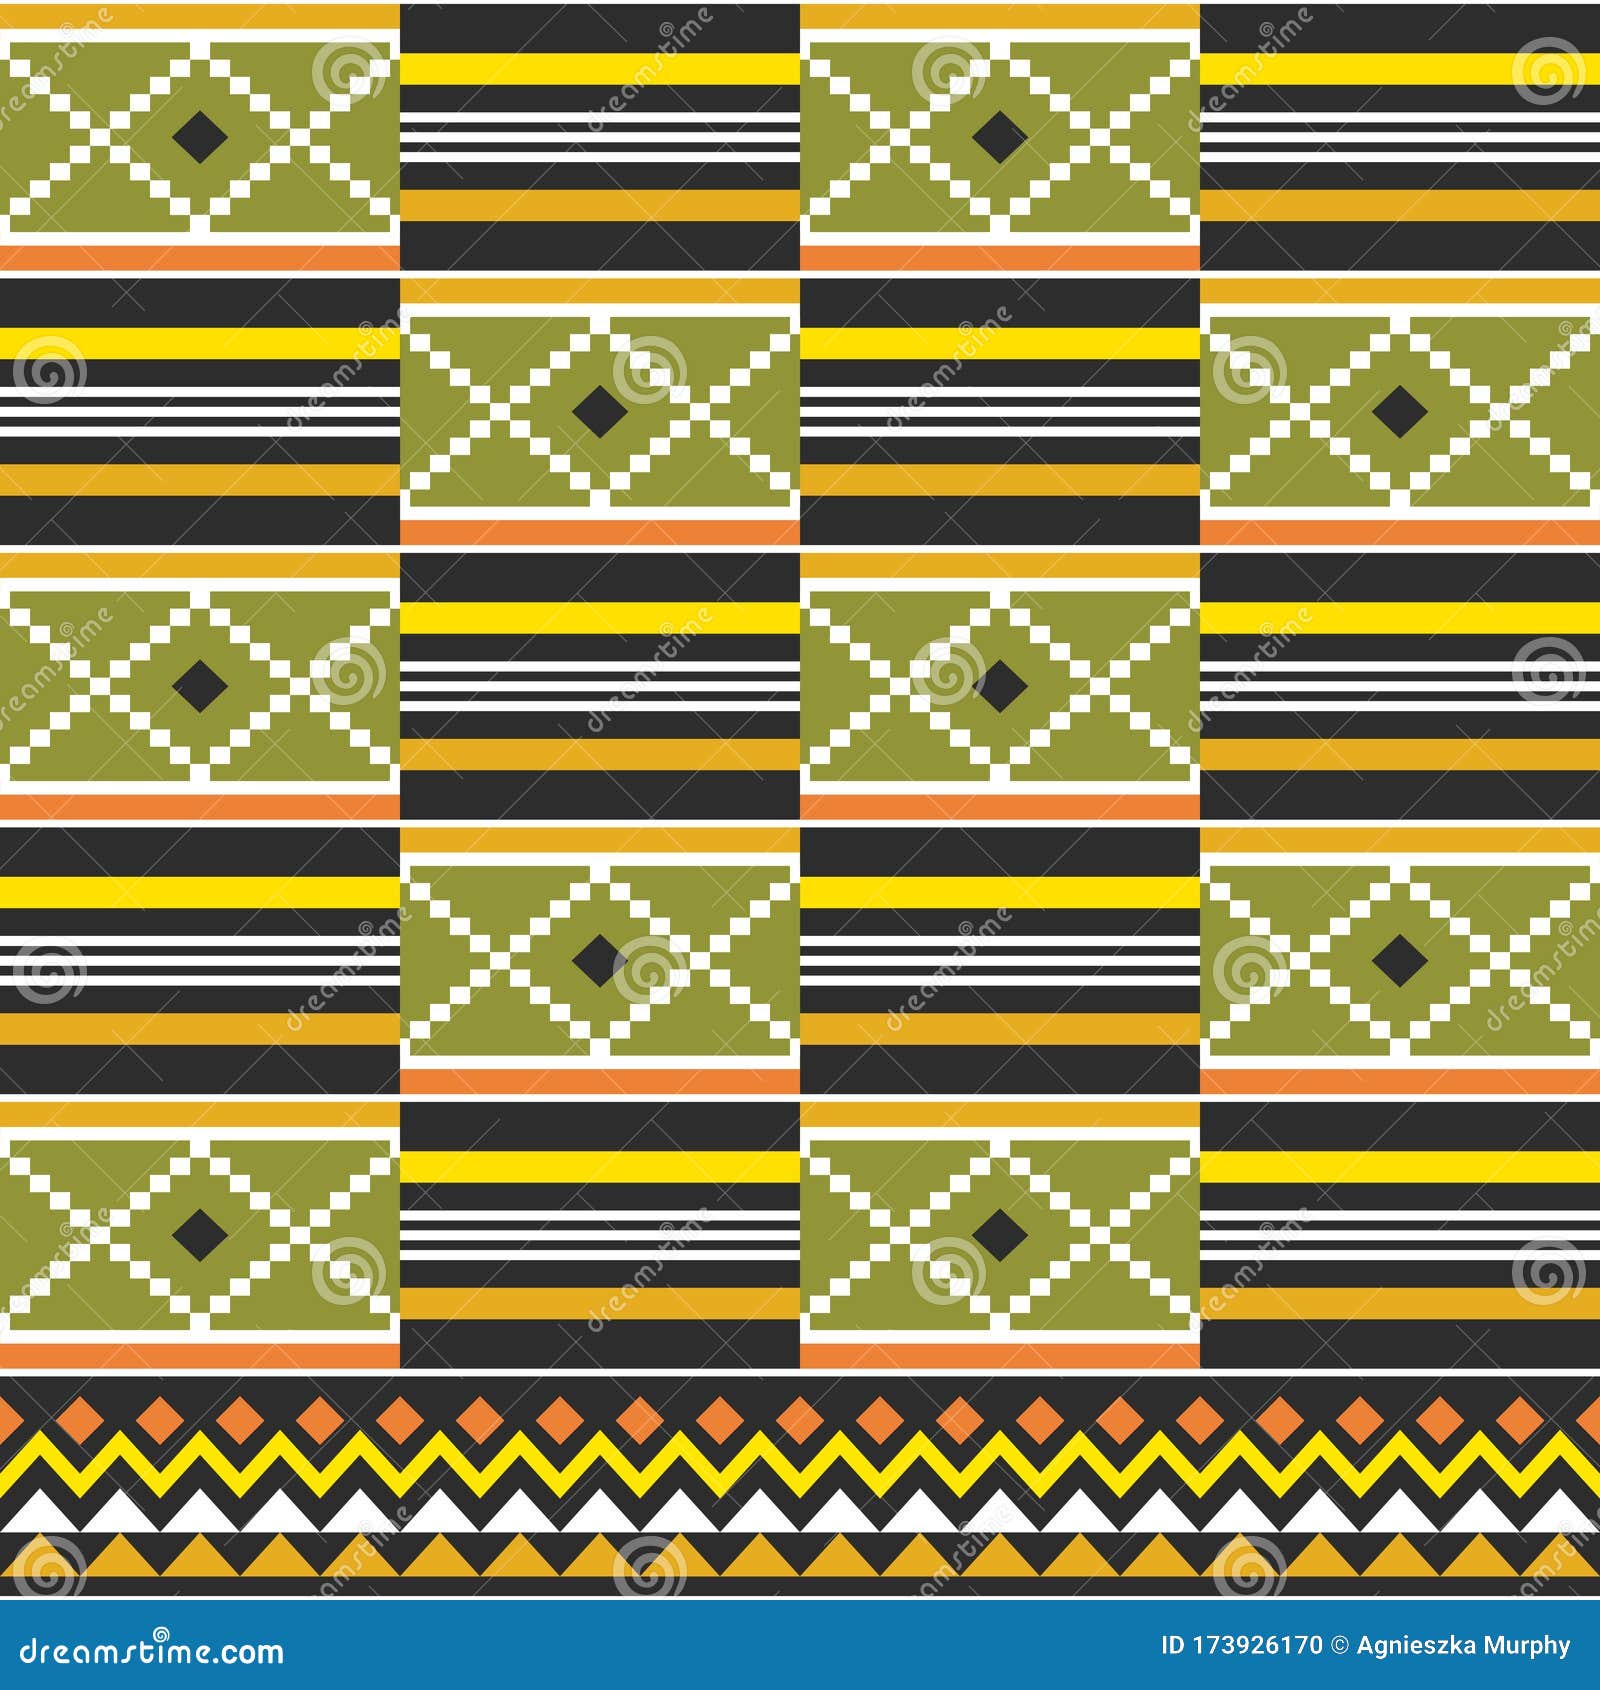 Tribal Kente cloth style vector pattern, african seamless design with  geometric shapes inspired by traditional fabrics or textiles from Ghana  known as nwentoma Stock Vector